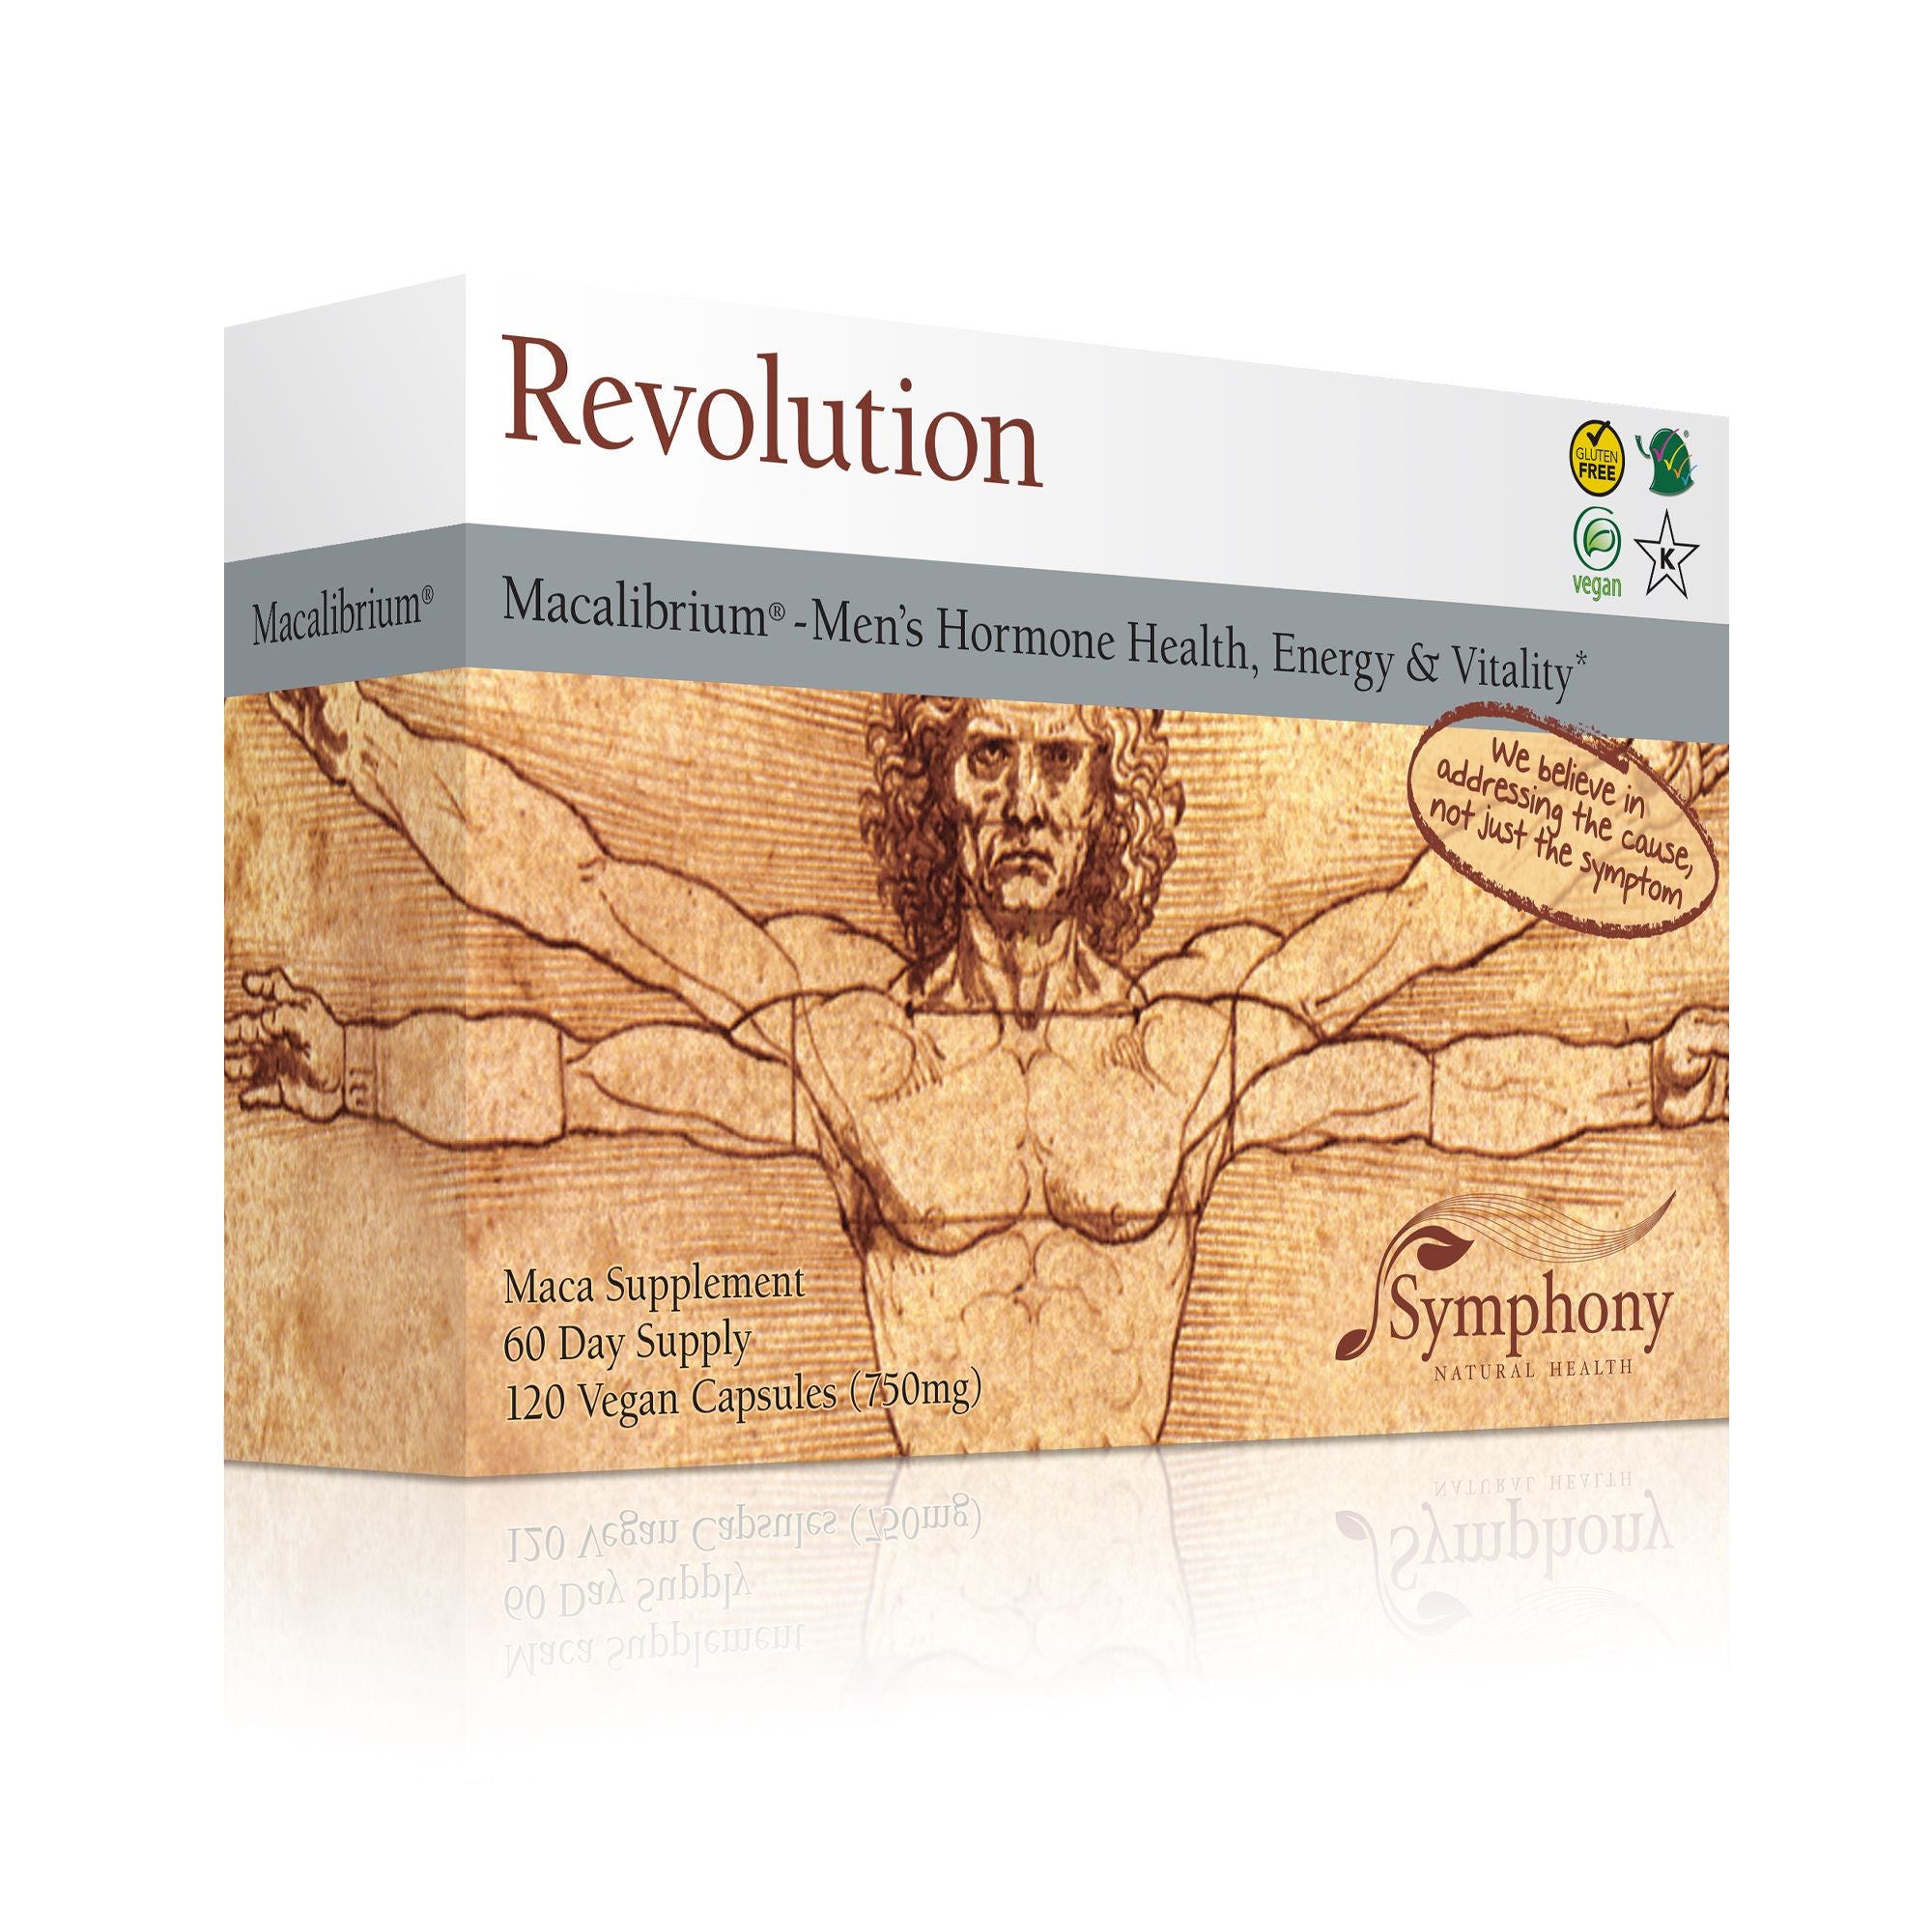 Revolution Macalibrium right-facing product box with Vitruvian Man illustration, we believe in addressing the cause not just the symptom, vegan, gluten free, Kosher, on white background